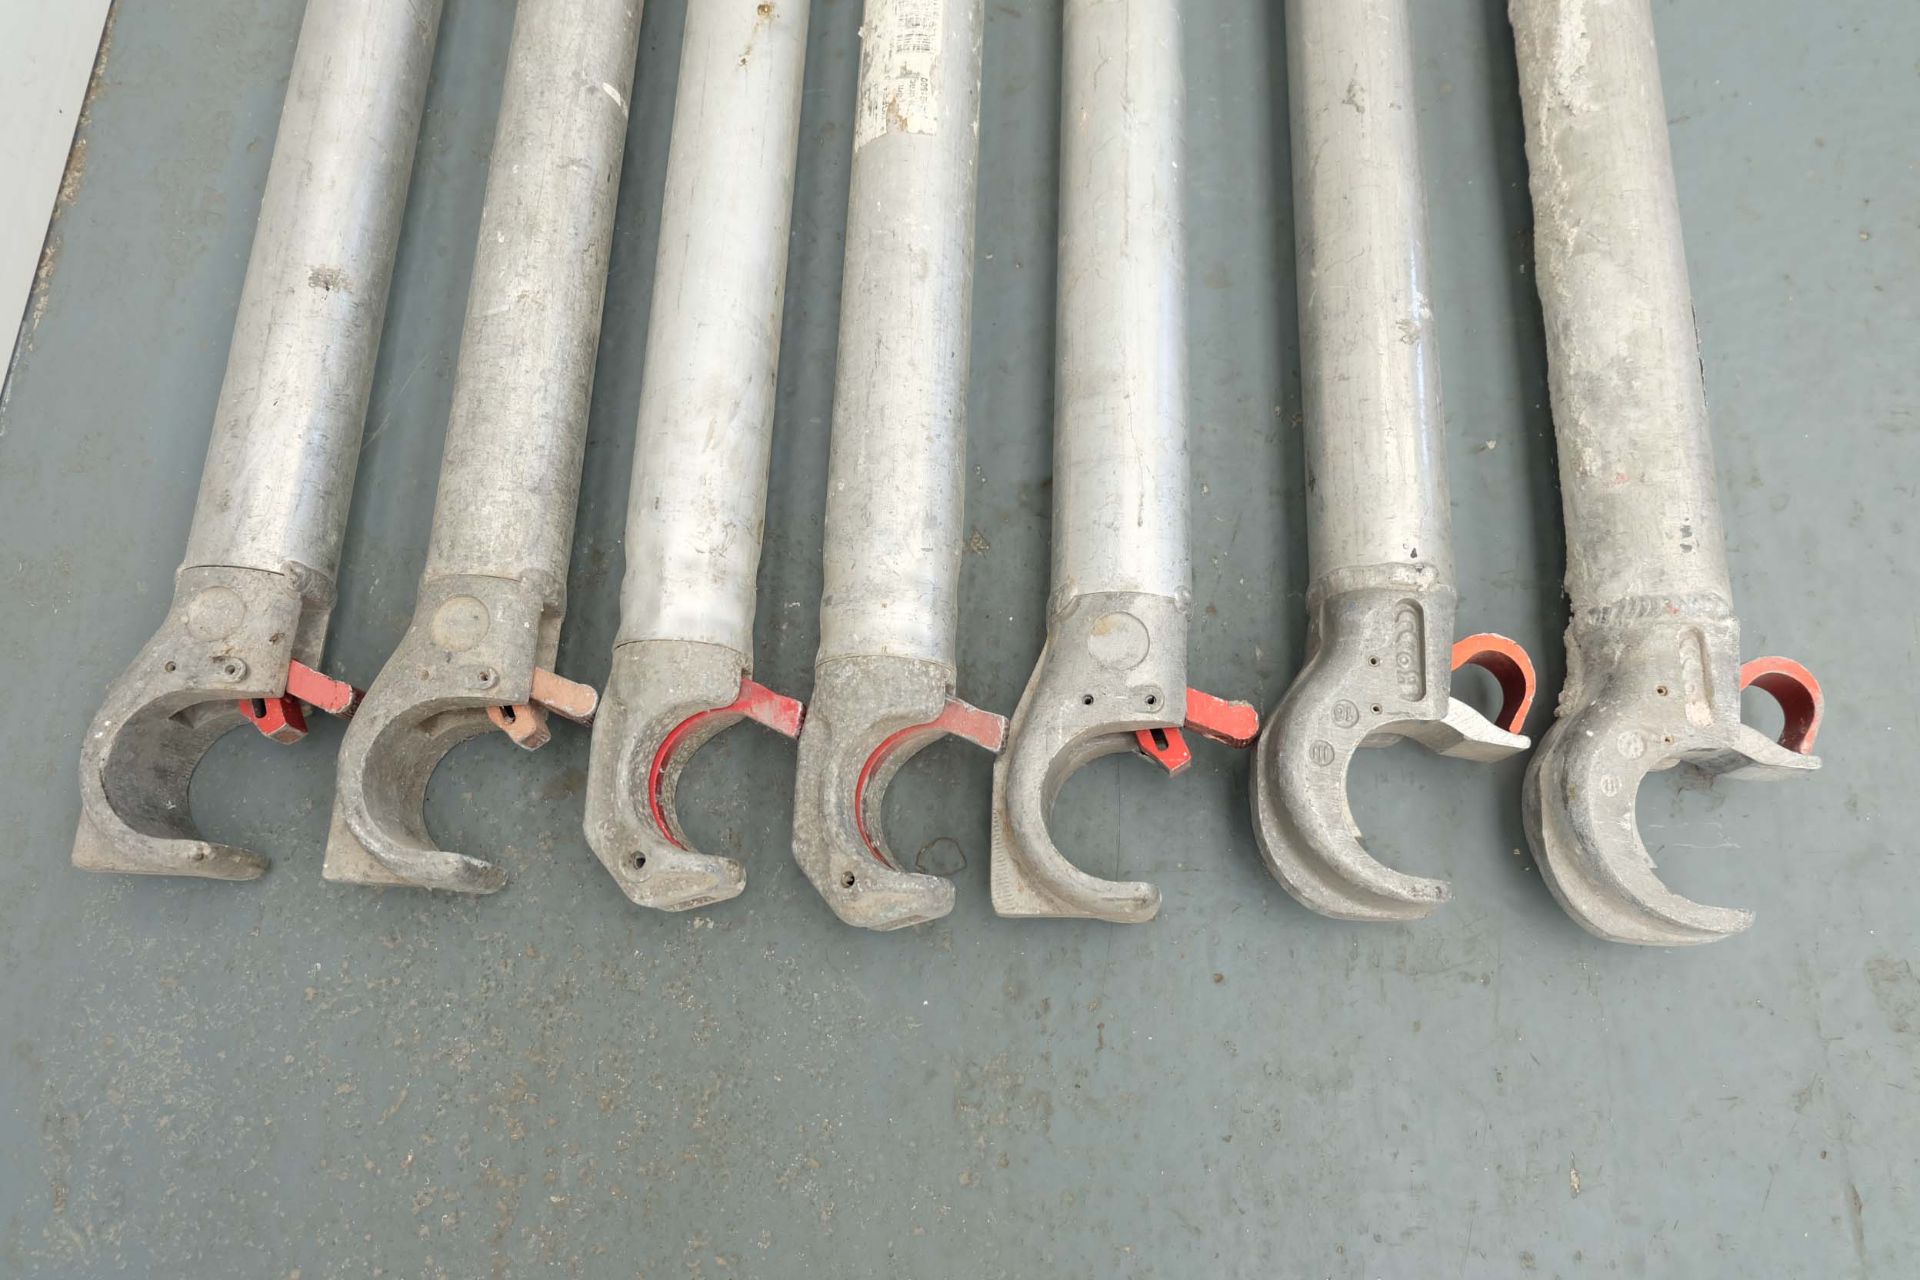 7 x Aluminium Braces for Scaffold Towers. Length: 1800mm From Clamp Centres. - Image 3 of 5